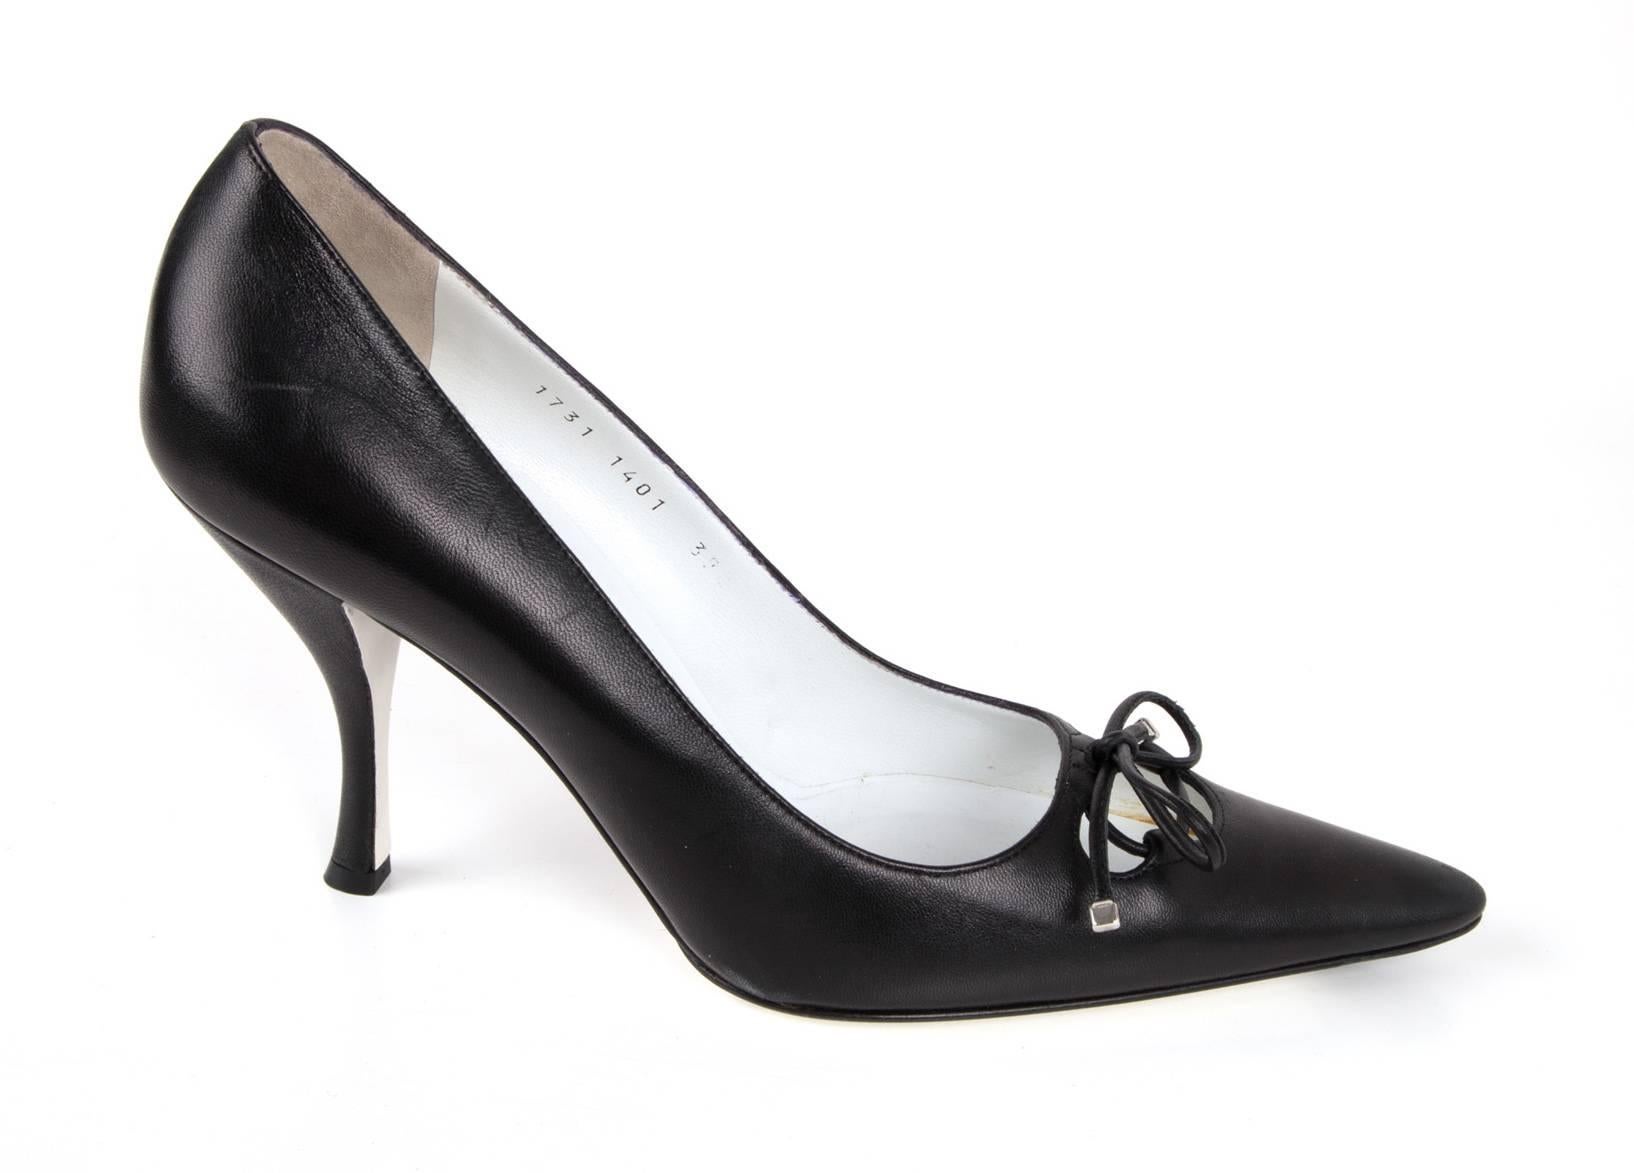 Guaranteed authentic Dolce&Gabbana beautiful black leather pump with key hole and leather tie.
The ties ends have silver tips.  Pointed toe and shaped heel.  
NEW or NEVER WORN.
final sale.  

SHOE MEASURES:  
INNER SOLE  11